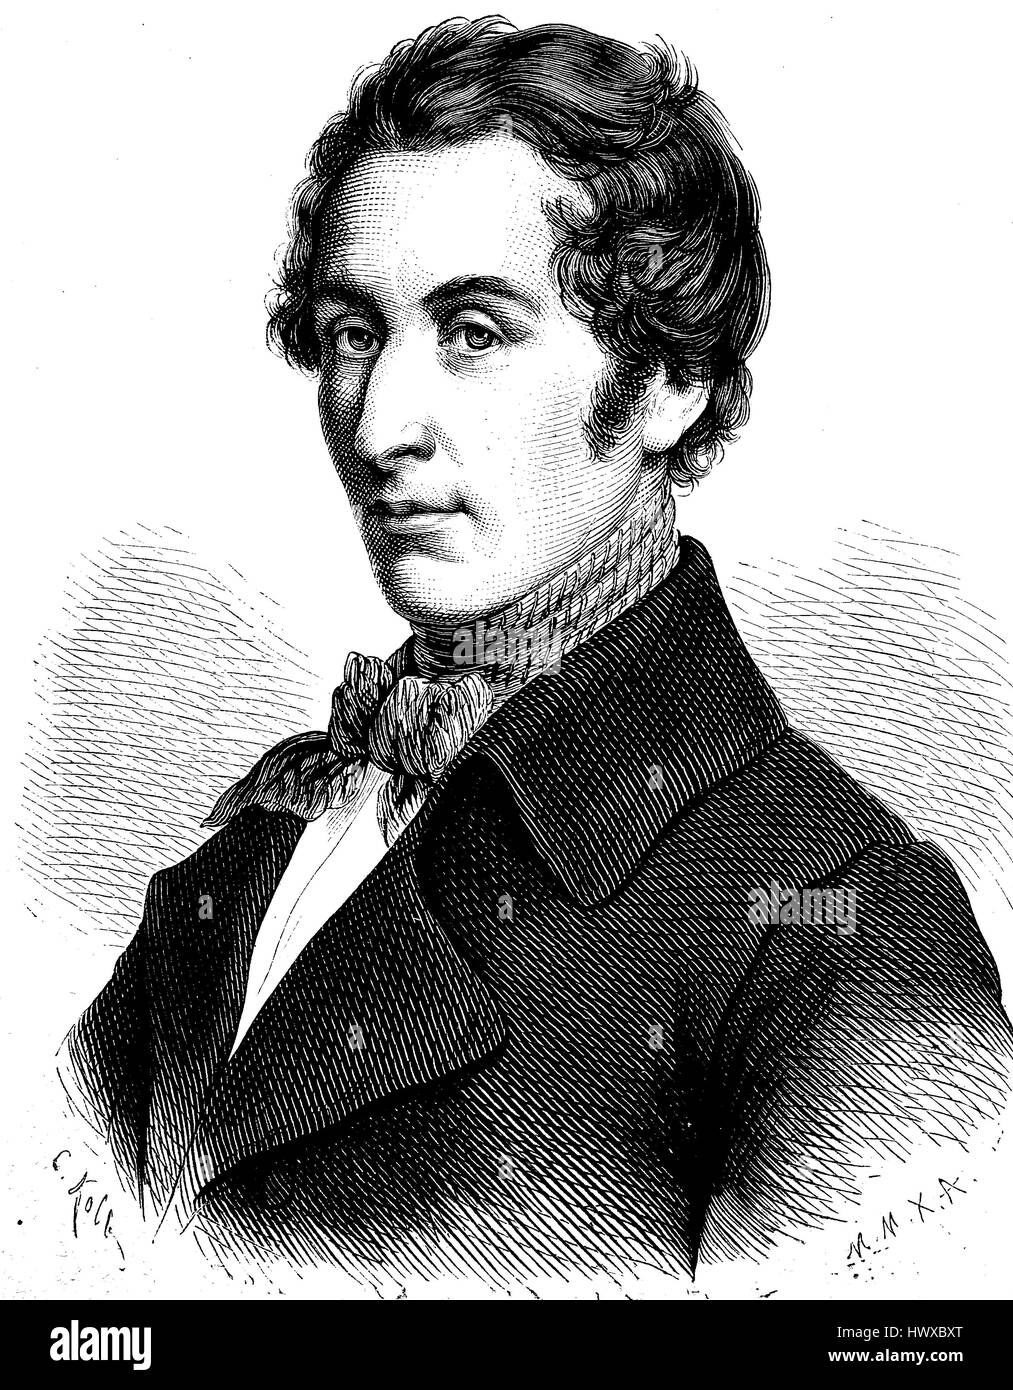 Carl Maria Friedrich Ernst von Weber, November 1786 - June 1826, was a German composer, conductor, pianist, guitarist and critic, one of the first significant composers of the Romantic school, Germany, reproduction of an image, woodcut from the year 1881, digital improved Stock Photo